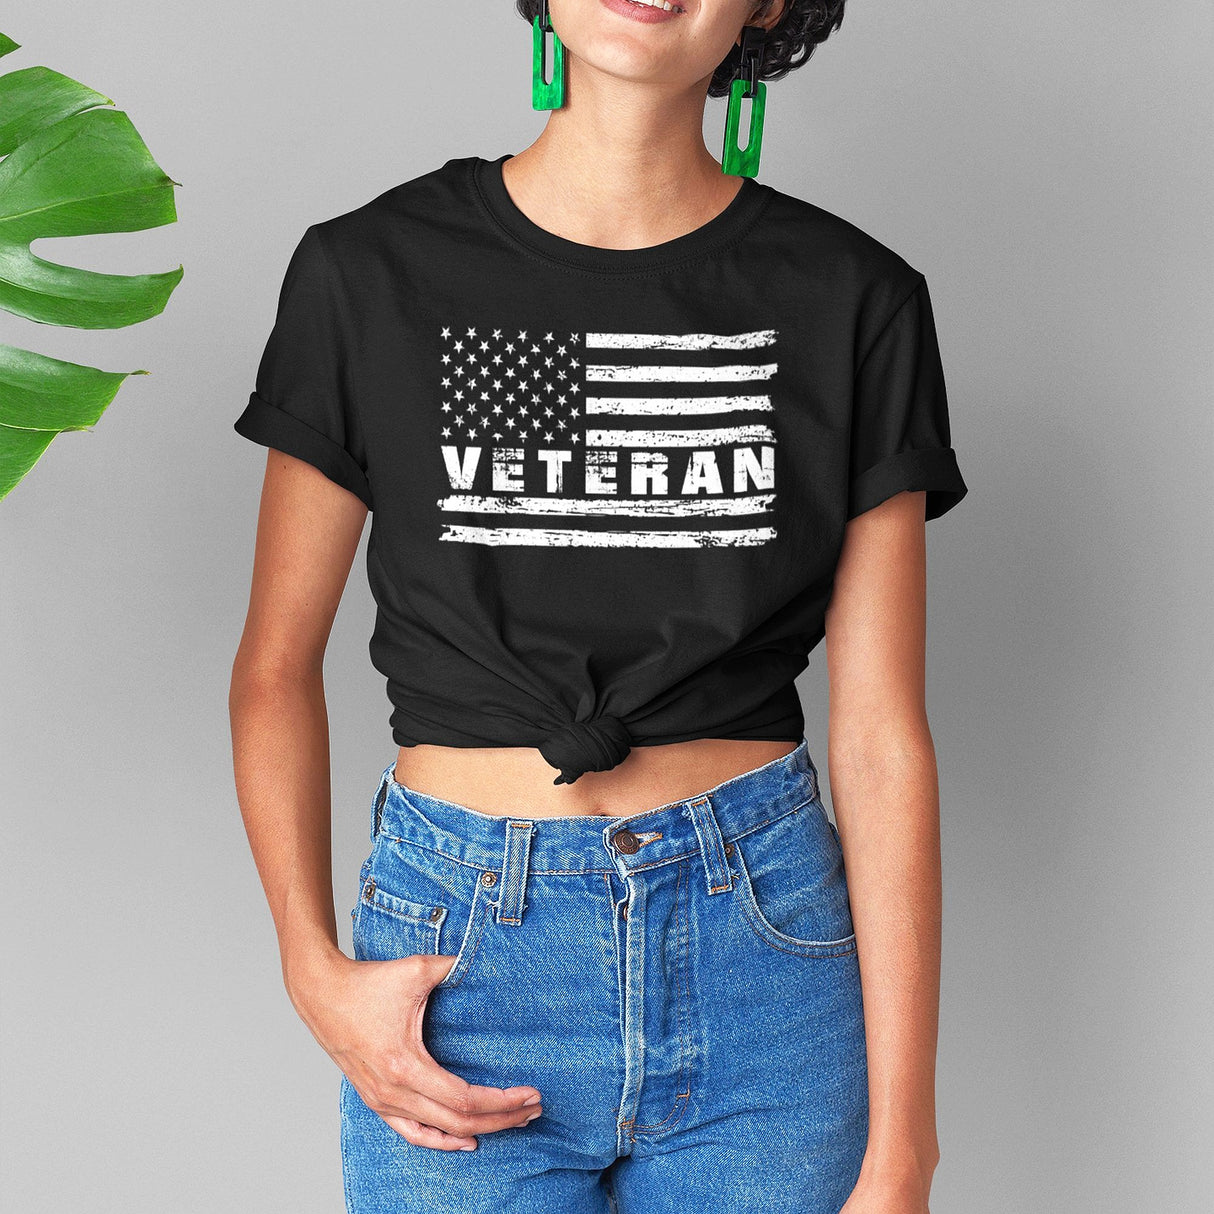 veteran-with-flag-veteran-tee-government-t-shirt-veteran-tee-patriotism-t-shirt-flag-tee#color_black